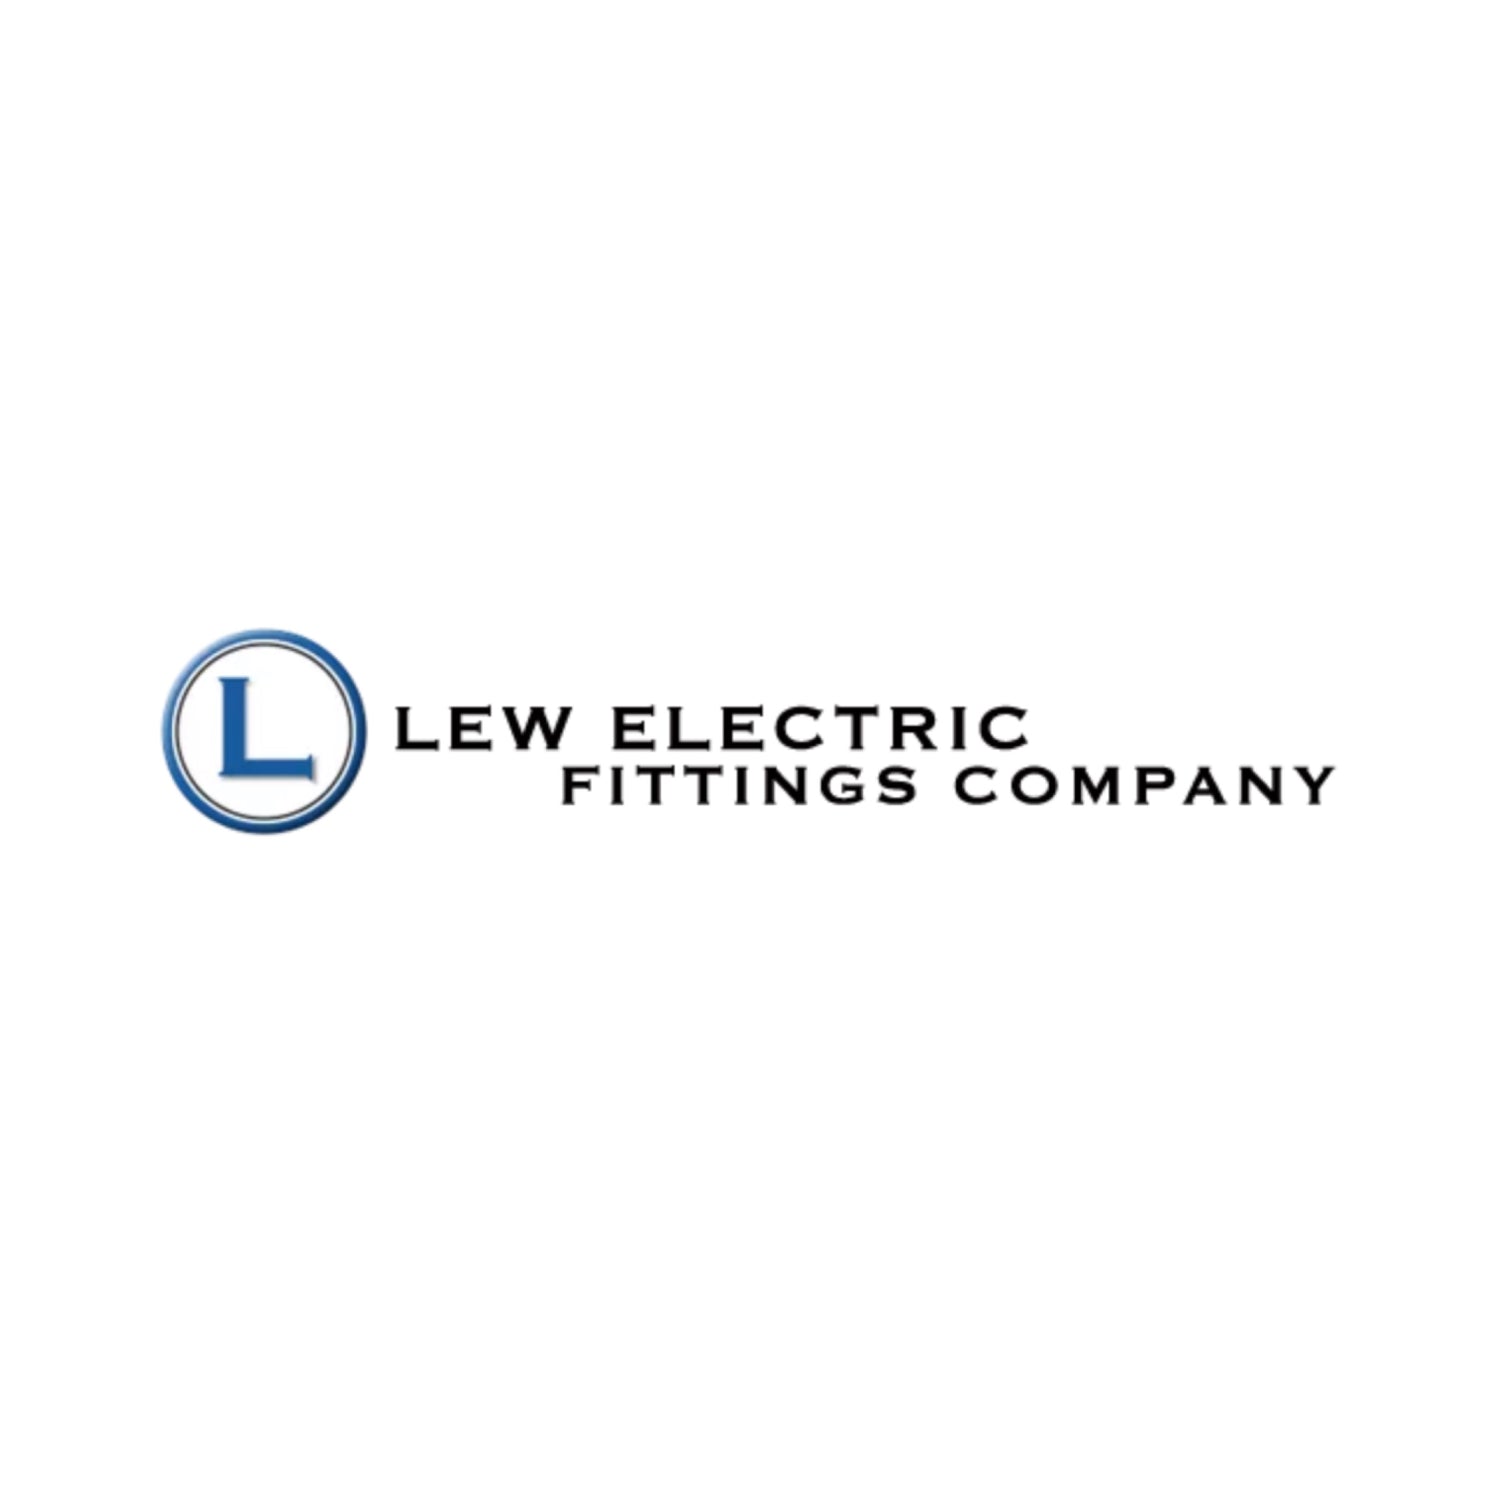 LEW ELECTRIC FITTINGS